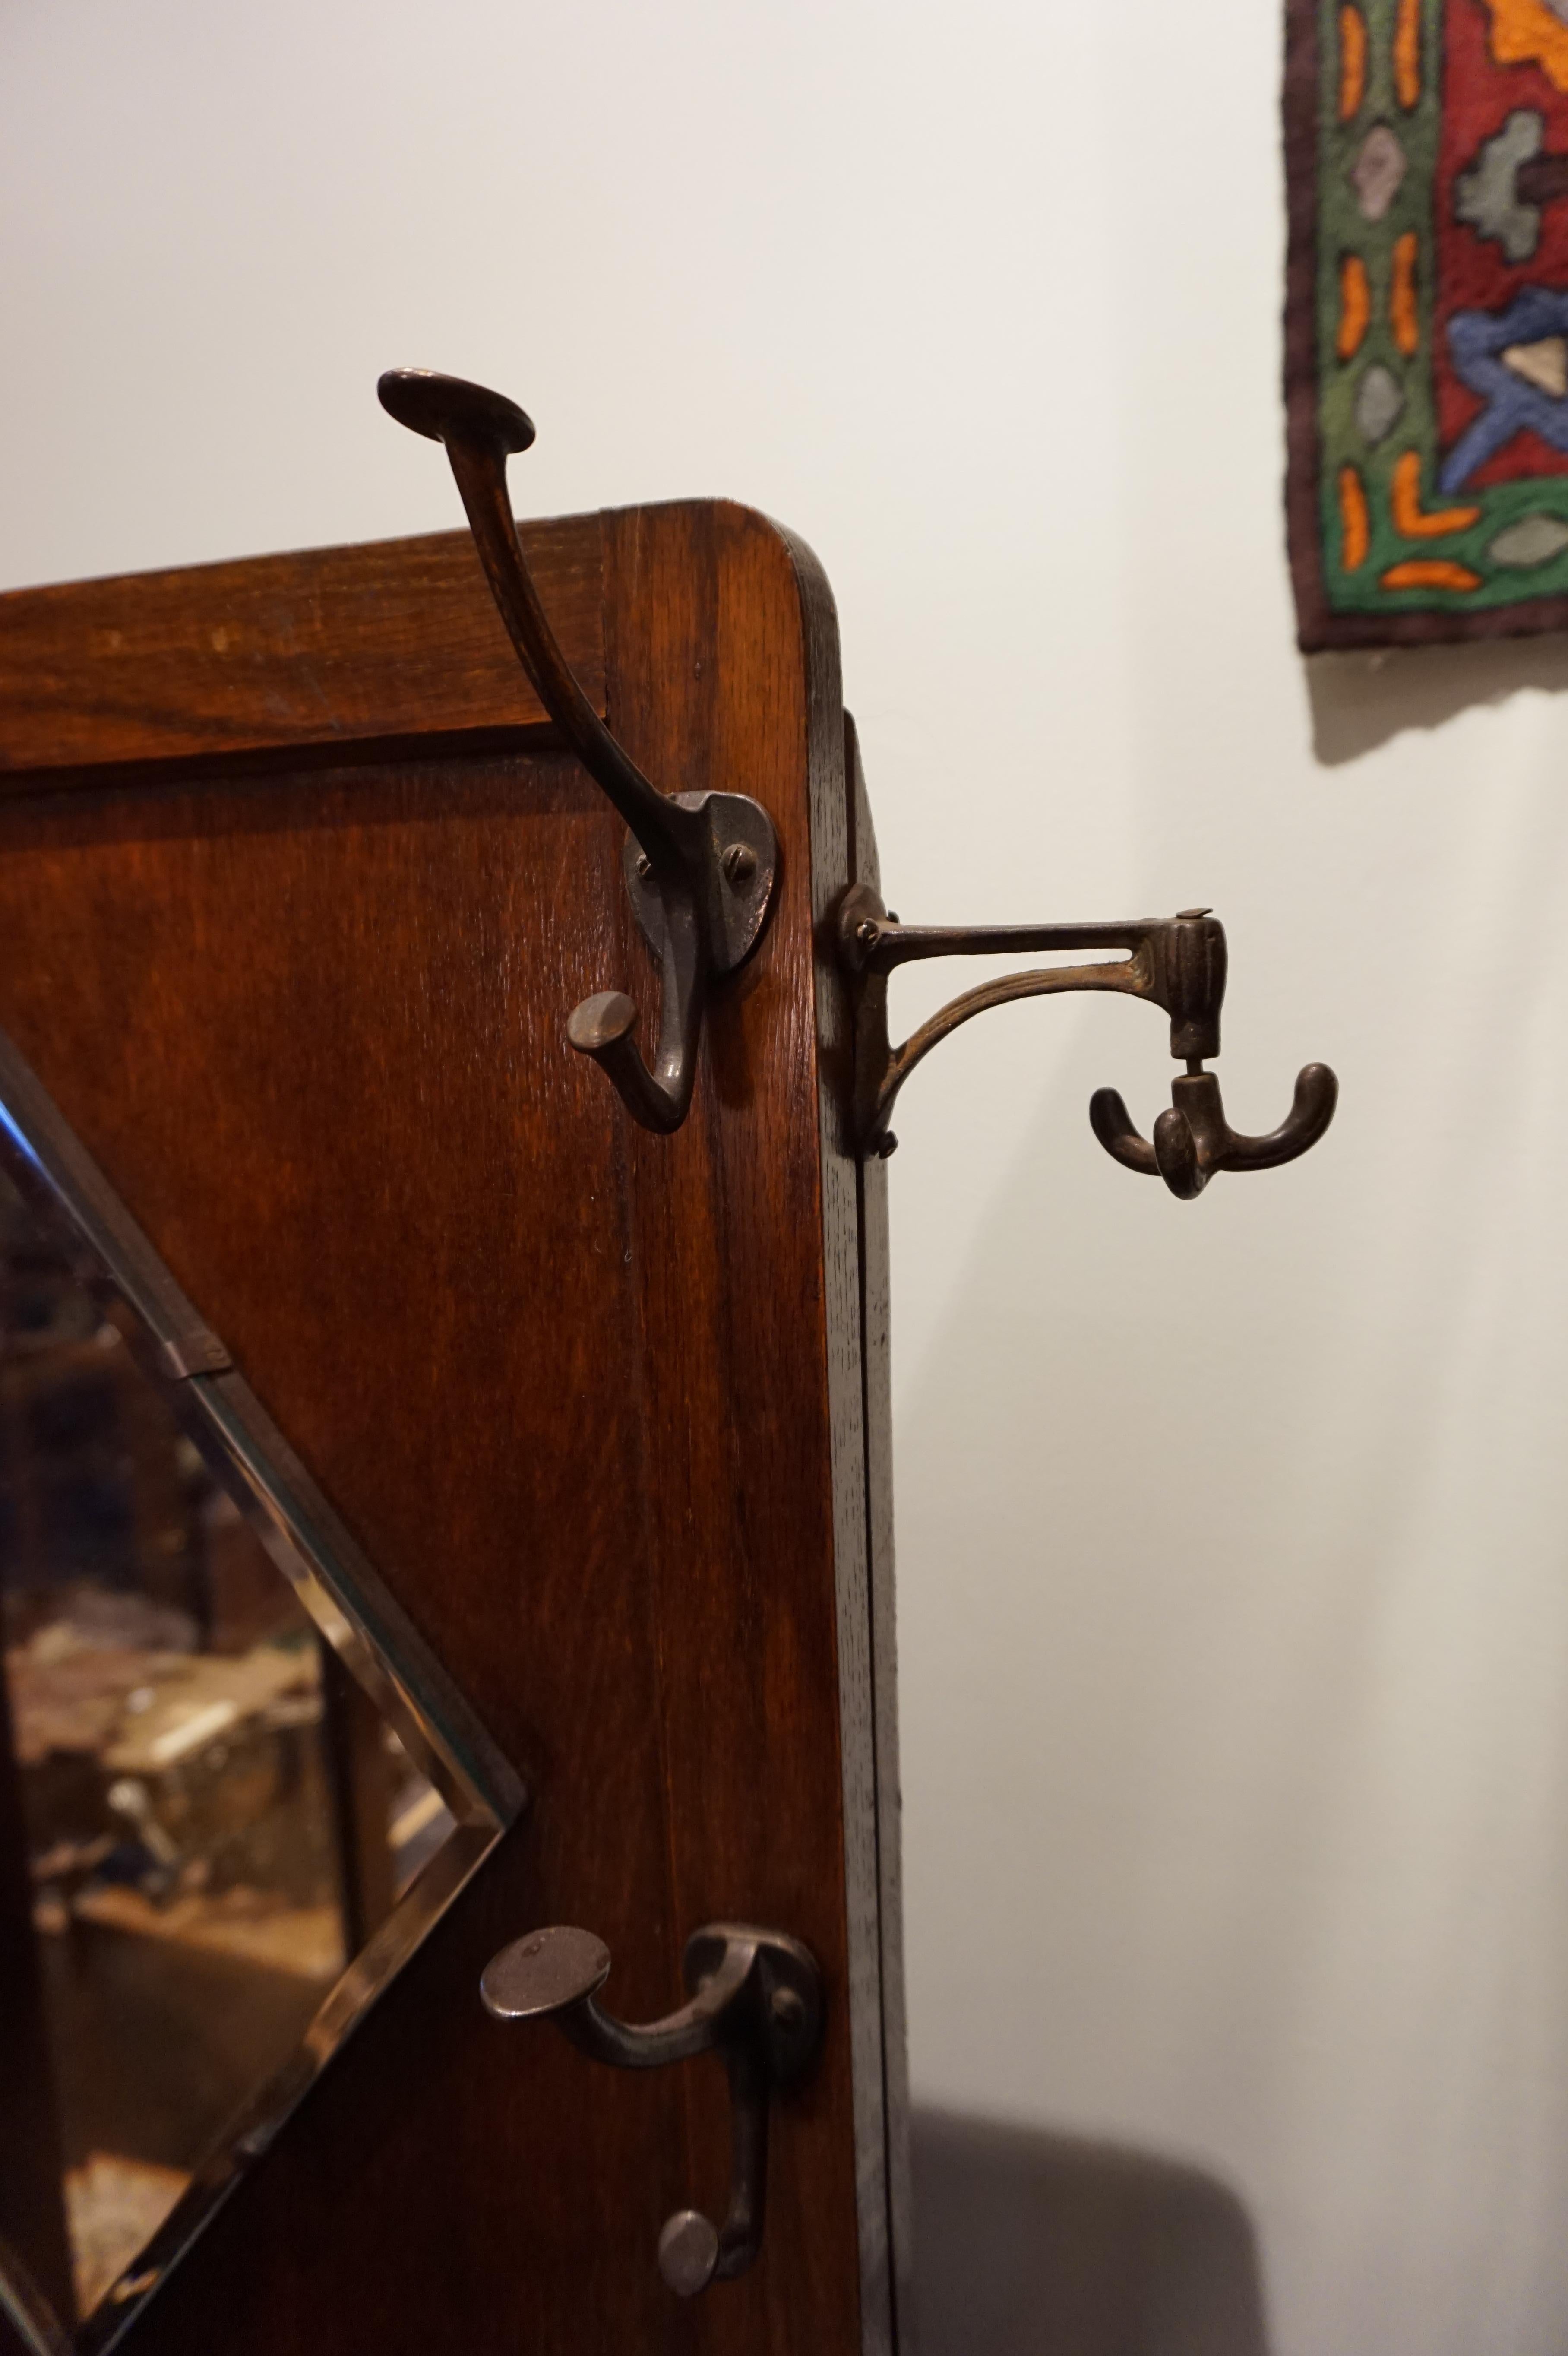 Quarter-sawn oak umbrella stand with bevel mirror, original hardware and metal trays including custom side extension hardware for scarves and coats. Utilitarian construction with clean lines and compact size,

circa 1935.